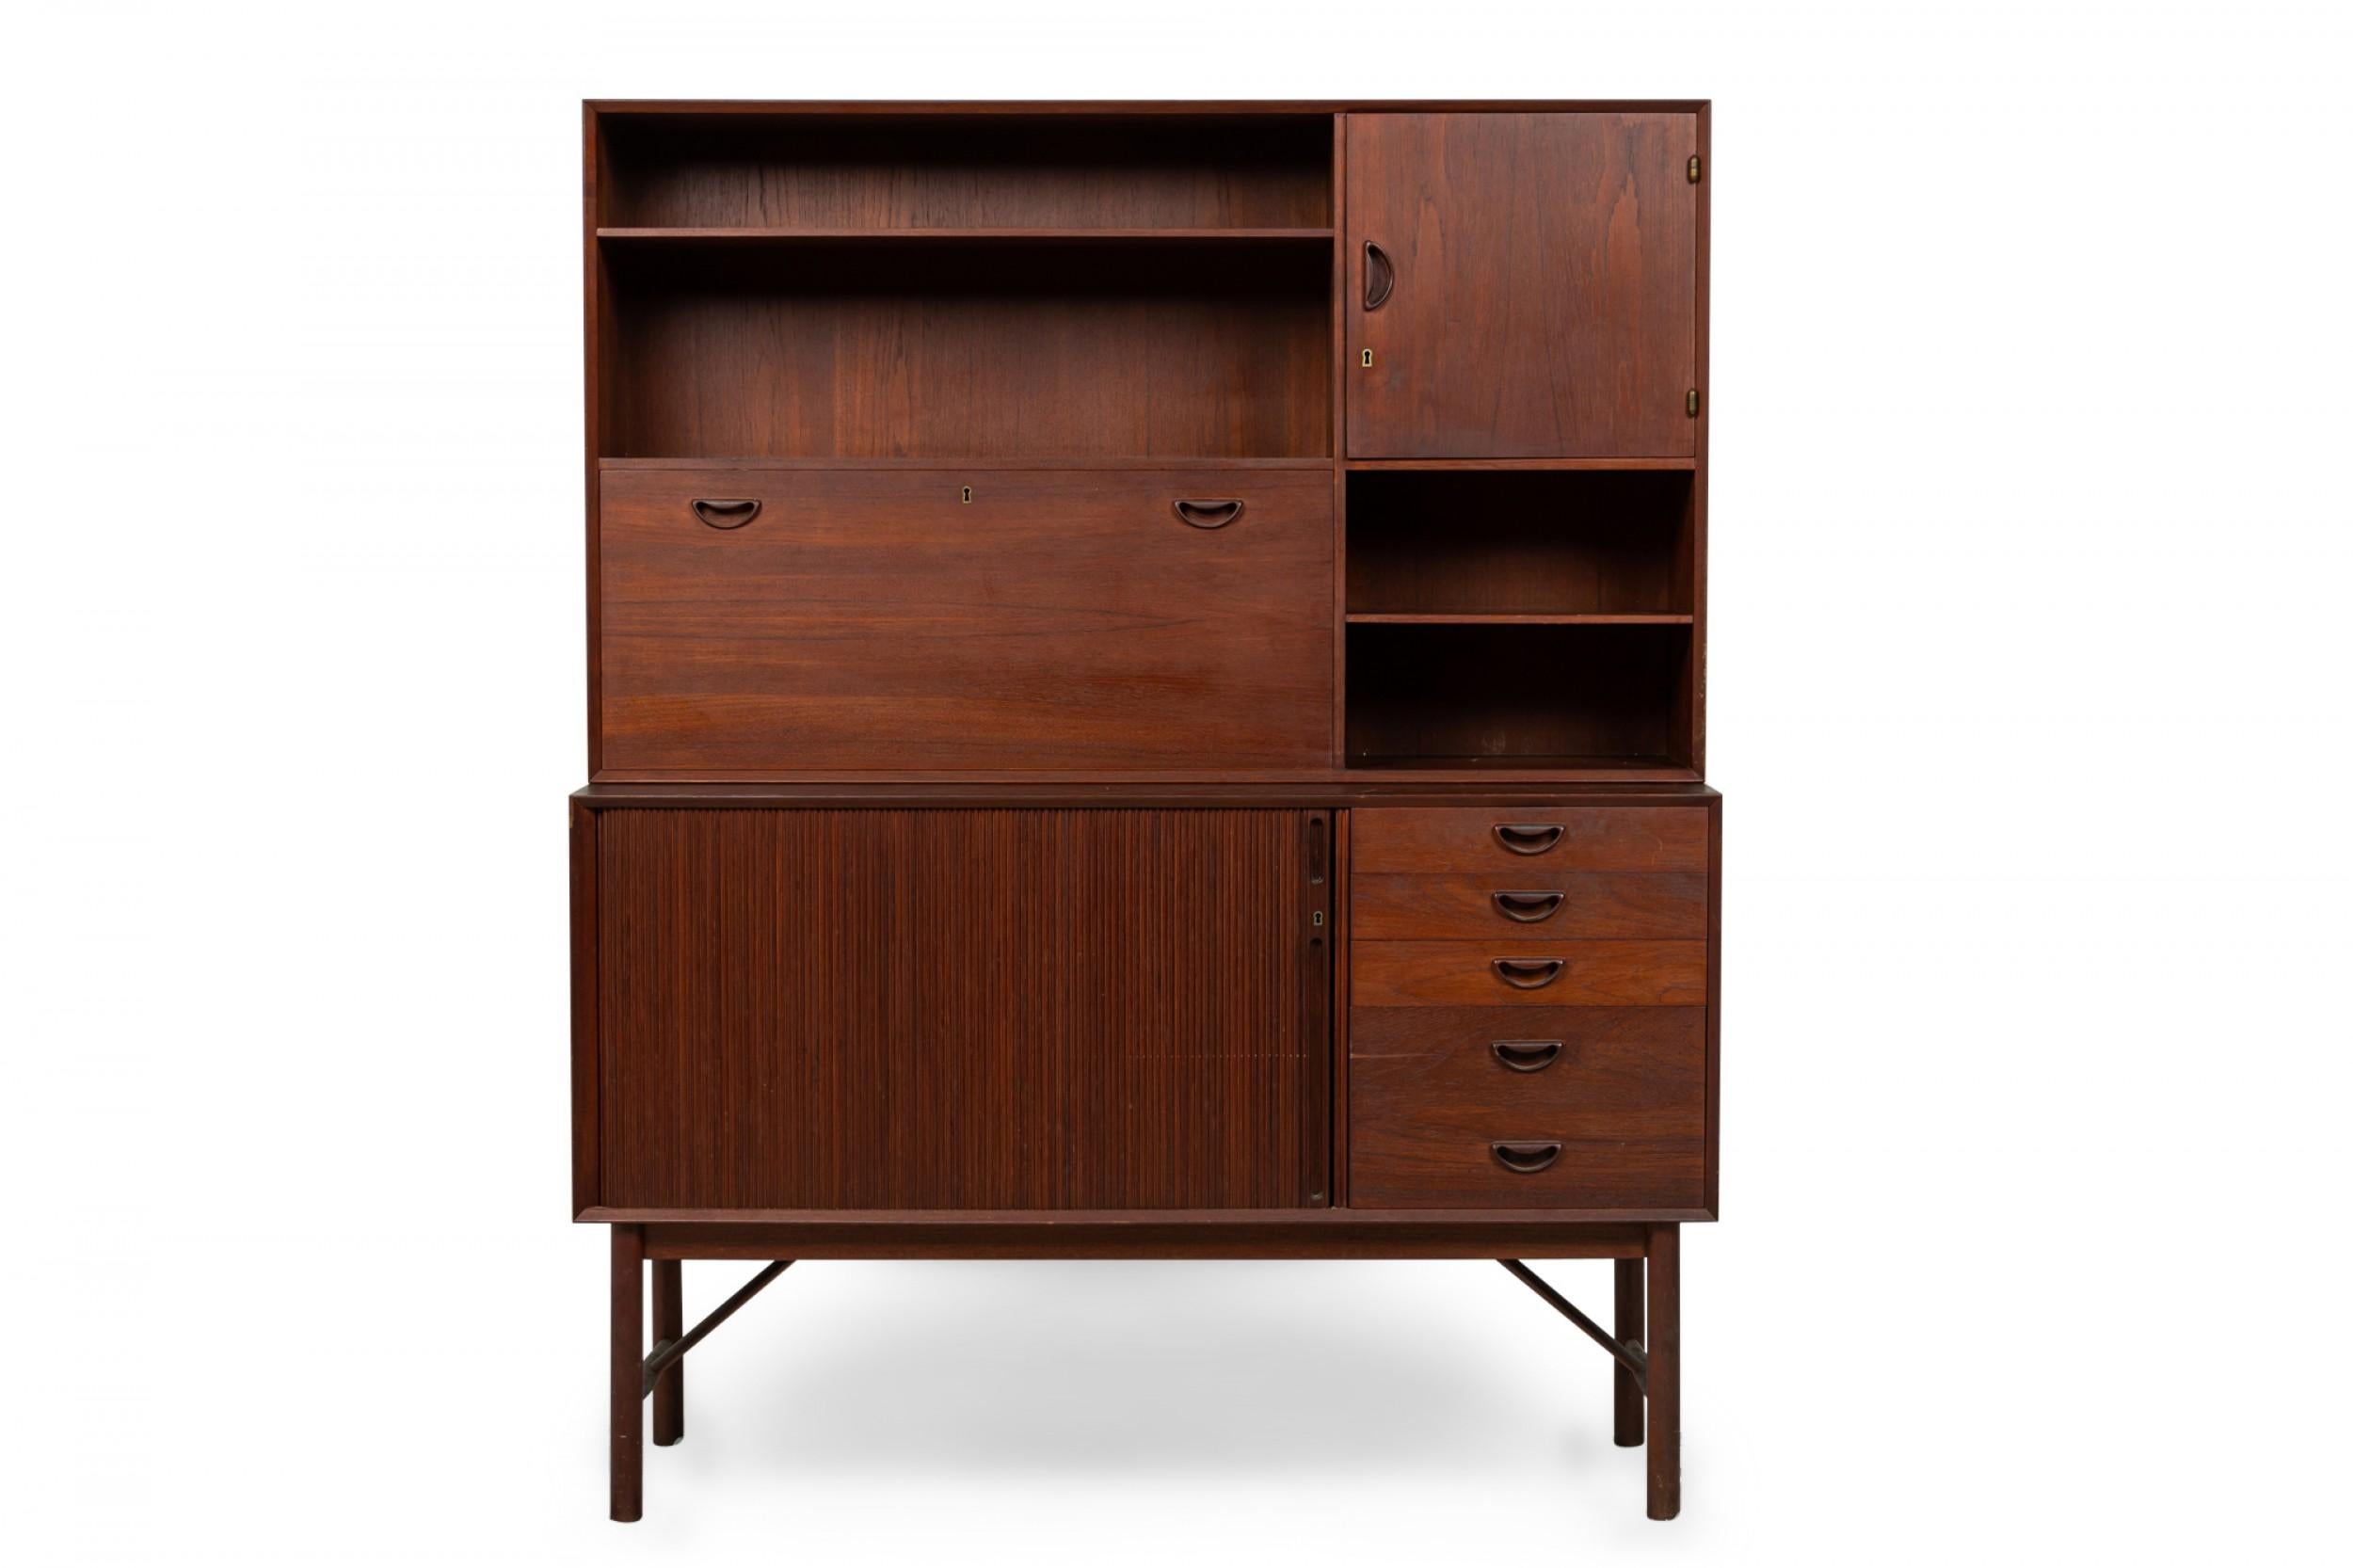 Midcentury Danish 2 piece teak hutch/credenza cabinet with 4 pullout drawers, 2 pullout door compartments, sculpted pulls and sliding tambour door. (Peter Hvidt FOR Søborg Møbler)(Similar piece: DUF0892).